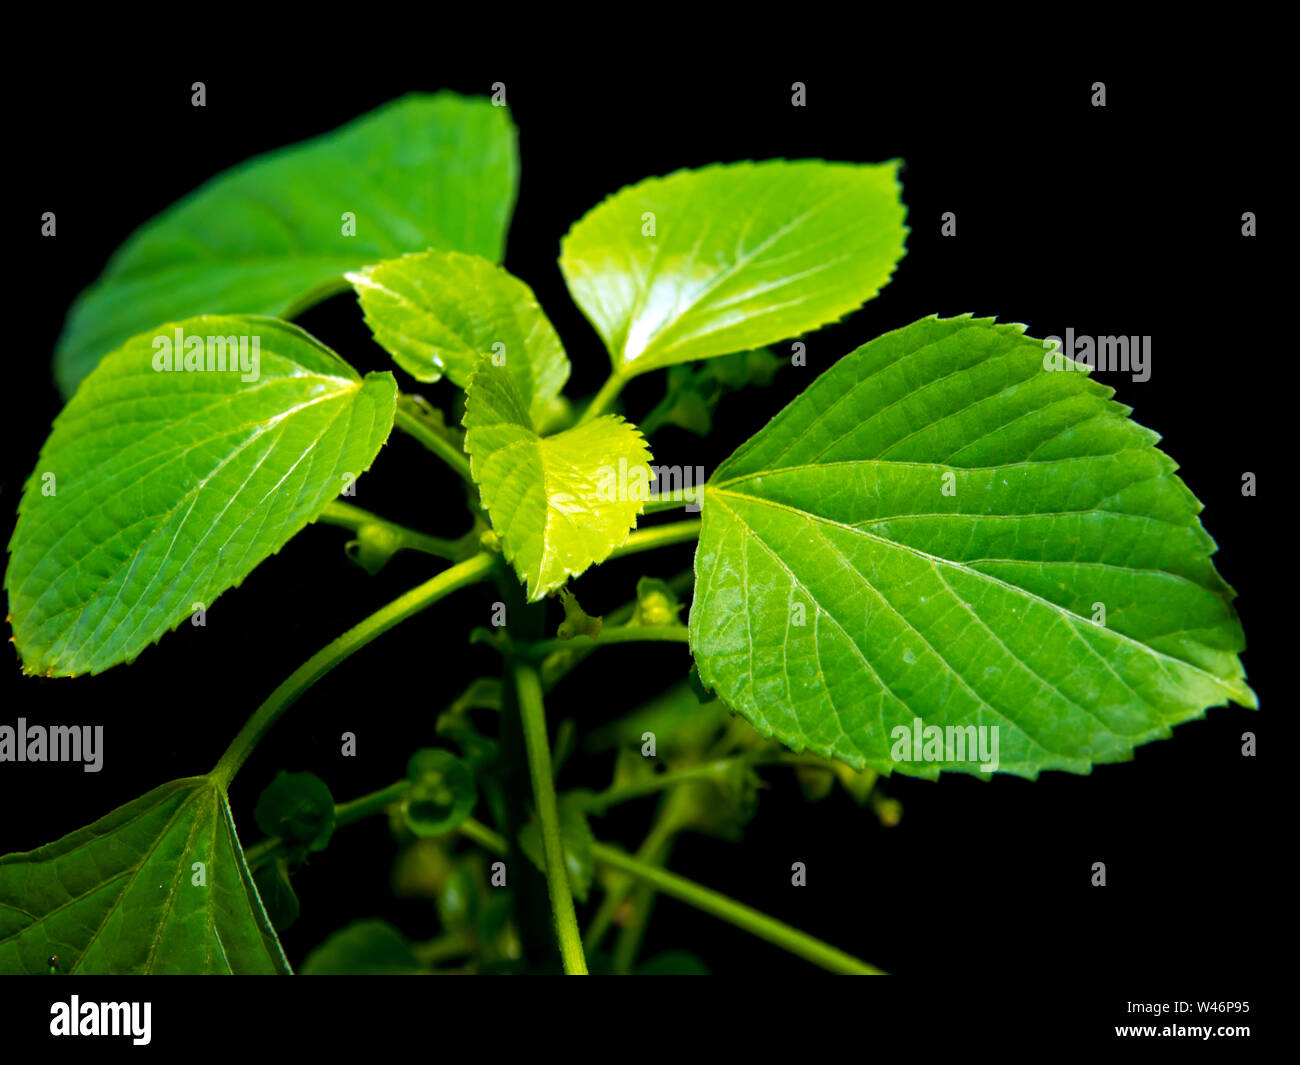 Fresh leaves of Indian acalypha copperleaf, Three-seeded mercury, in black background Stock Photo